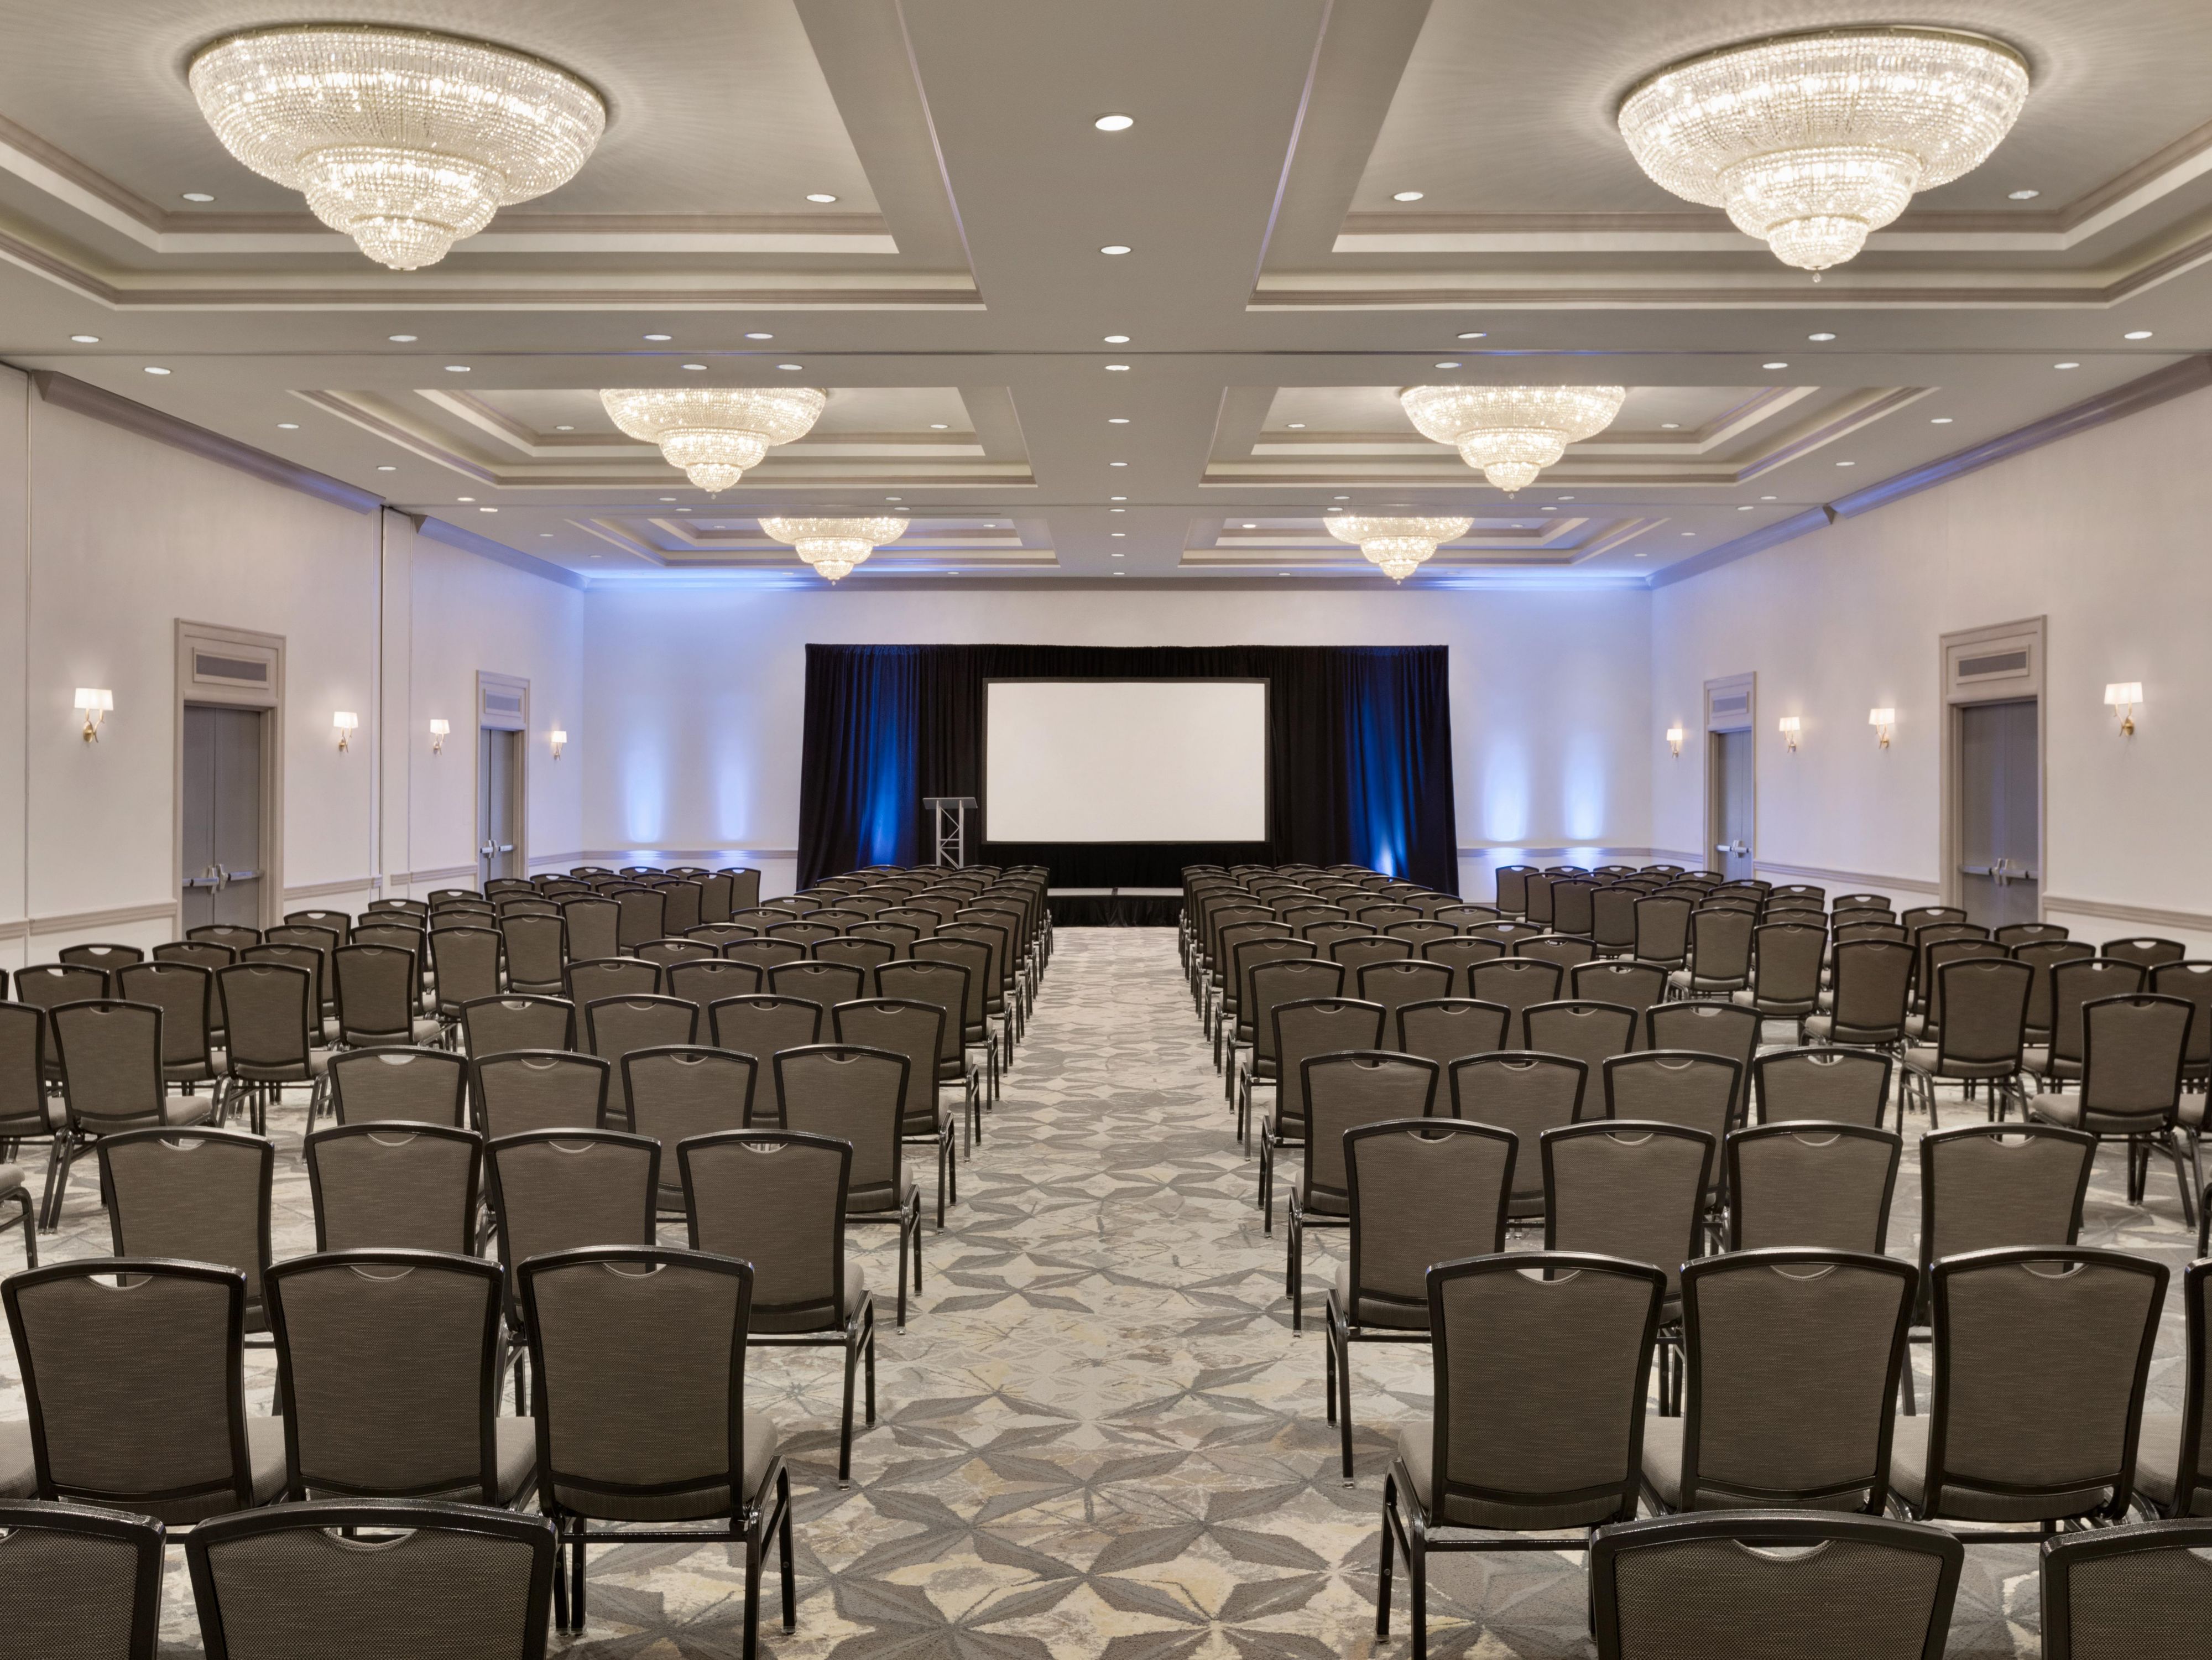 Whether you're hosting a luxurious wedding reception or a powerhouse business seminar, our hotel has the event space you need. With a separate event entrance, spacious conference rooms, two grand ballrooms and two large boardrooms, our customizable spaces accommodate up to 300 guests and are outfitted with state-of-the-art lighting and A/V systems.